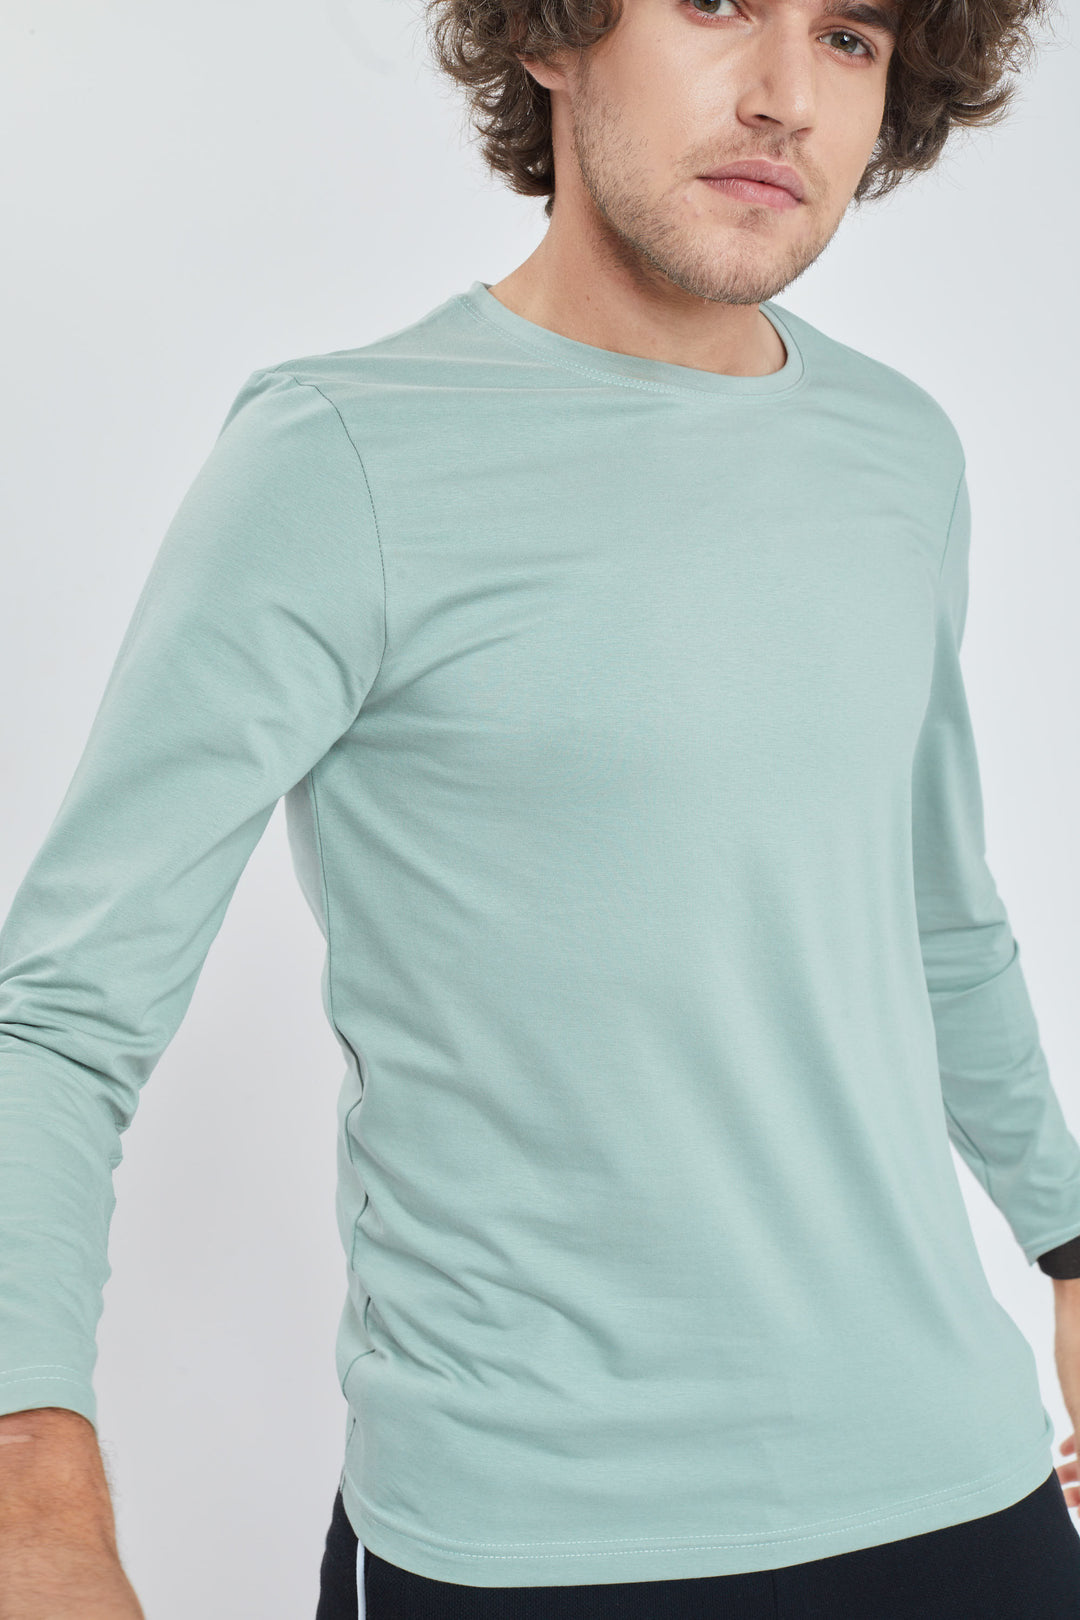 Teal Green Full Sleeves 4-way Stretch Crew Neck T-Shirt - SNITCH